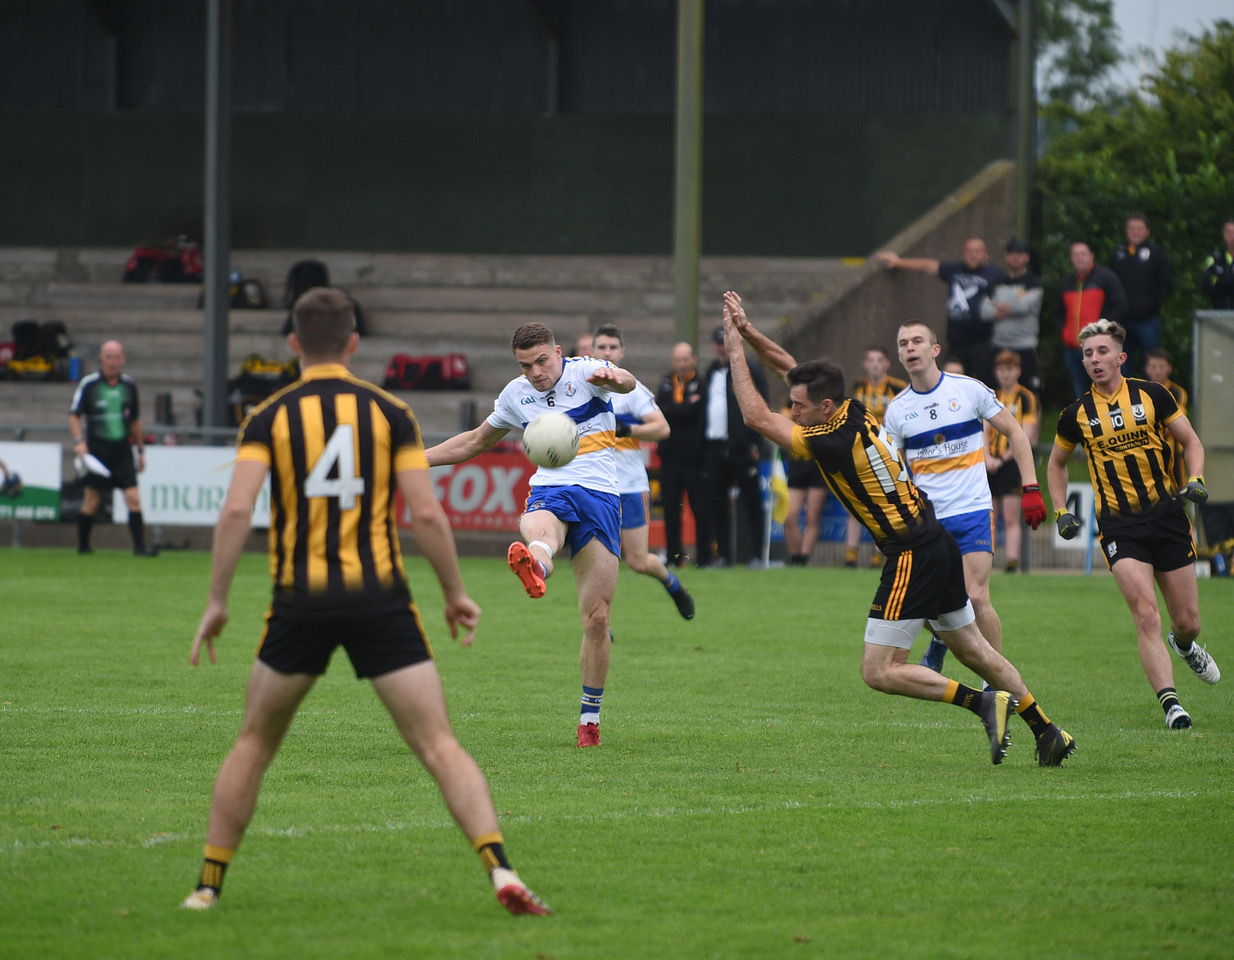 Errigal cuise to facile victory over Pomeroy